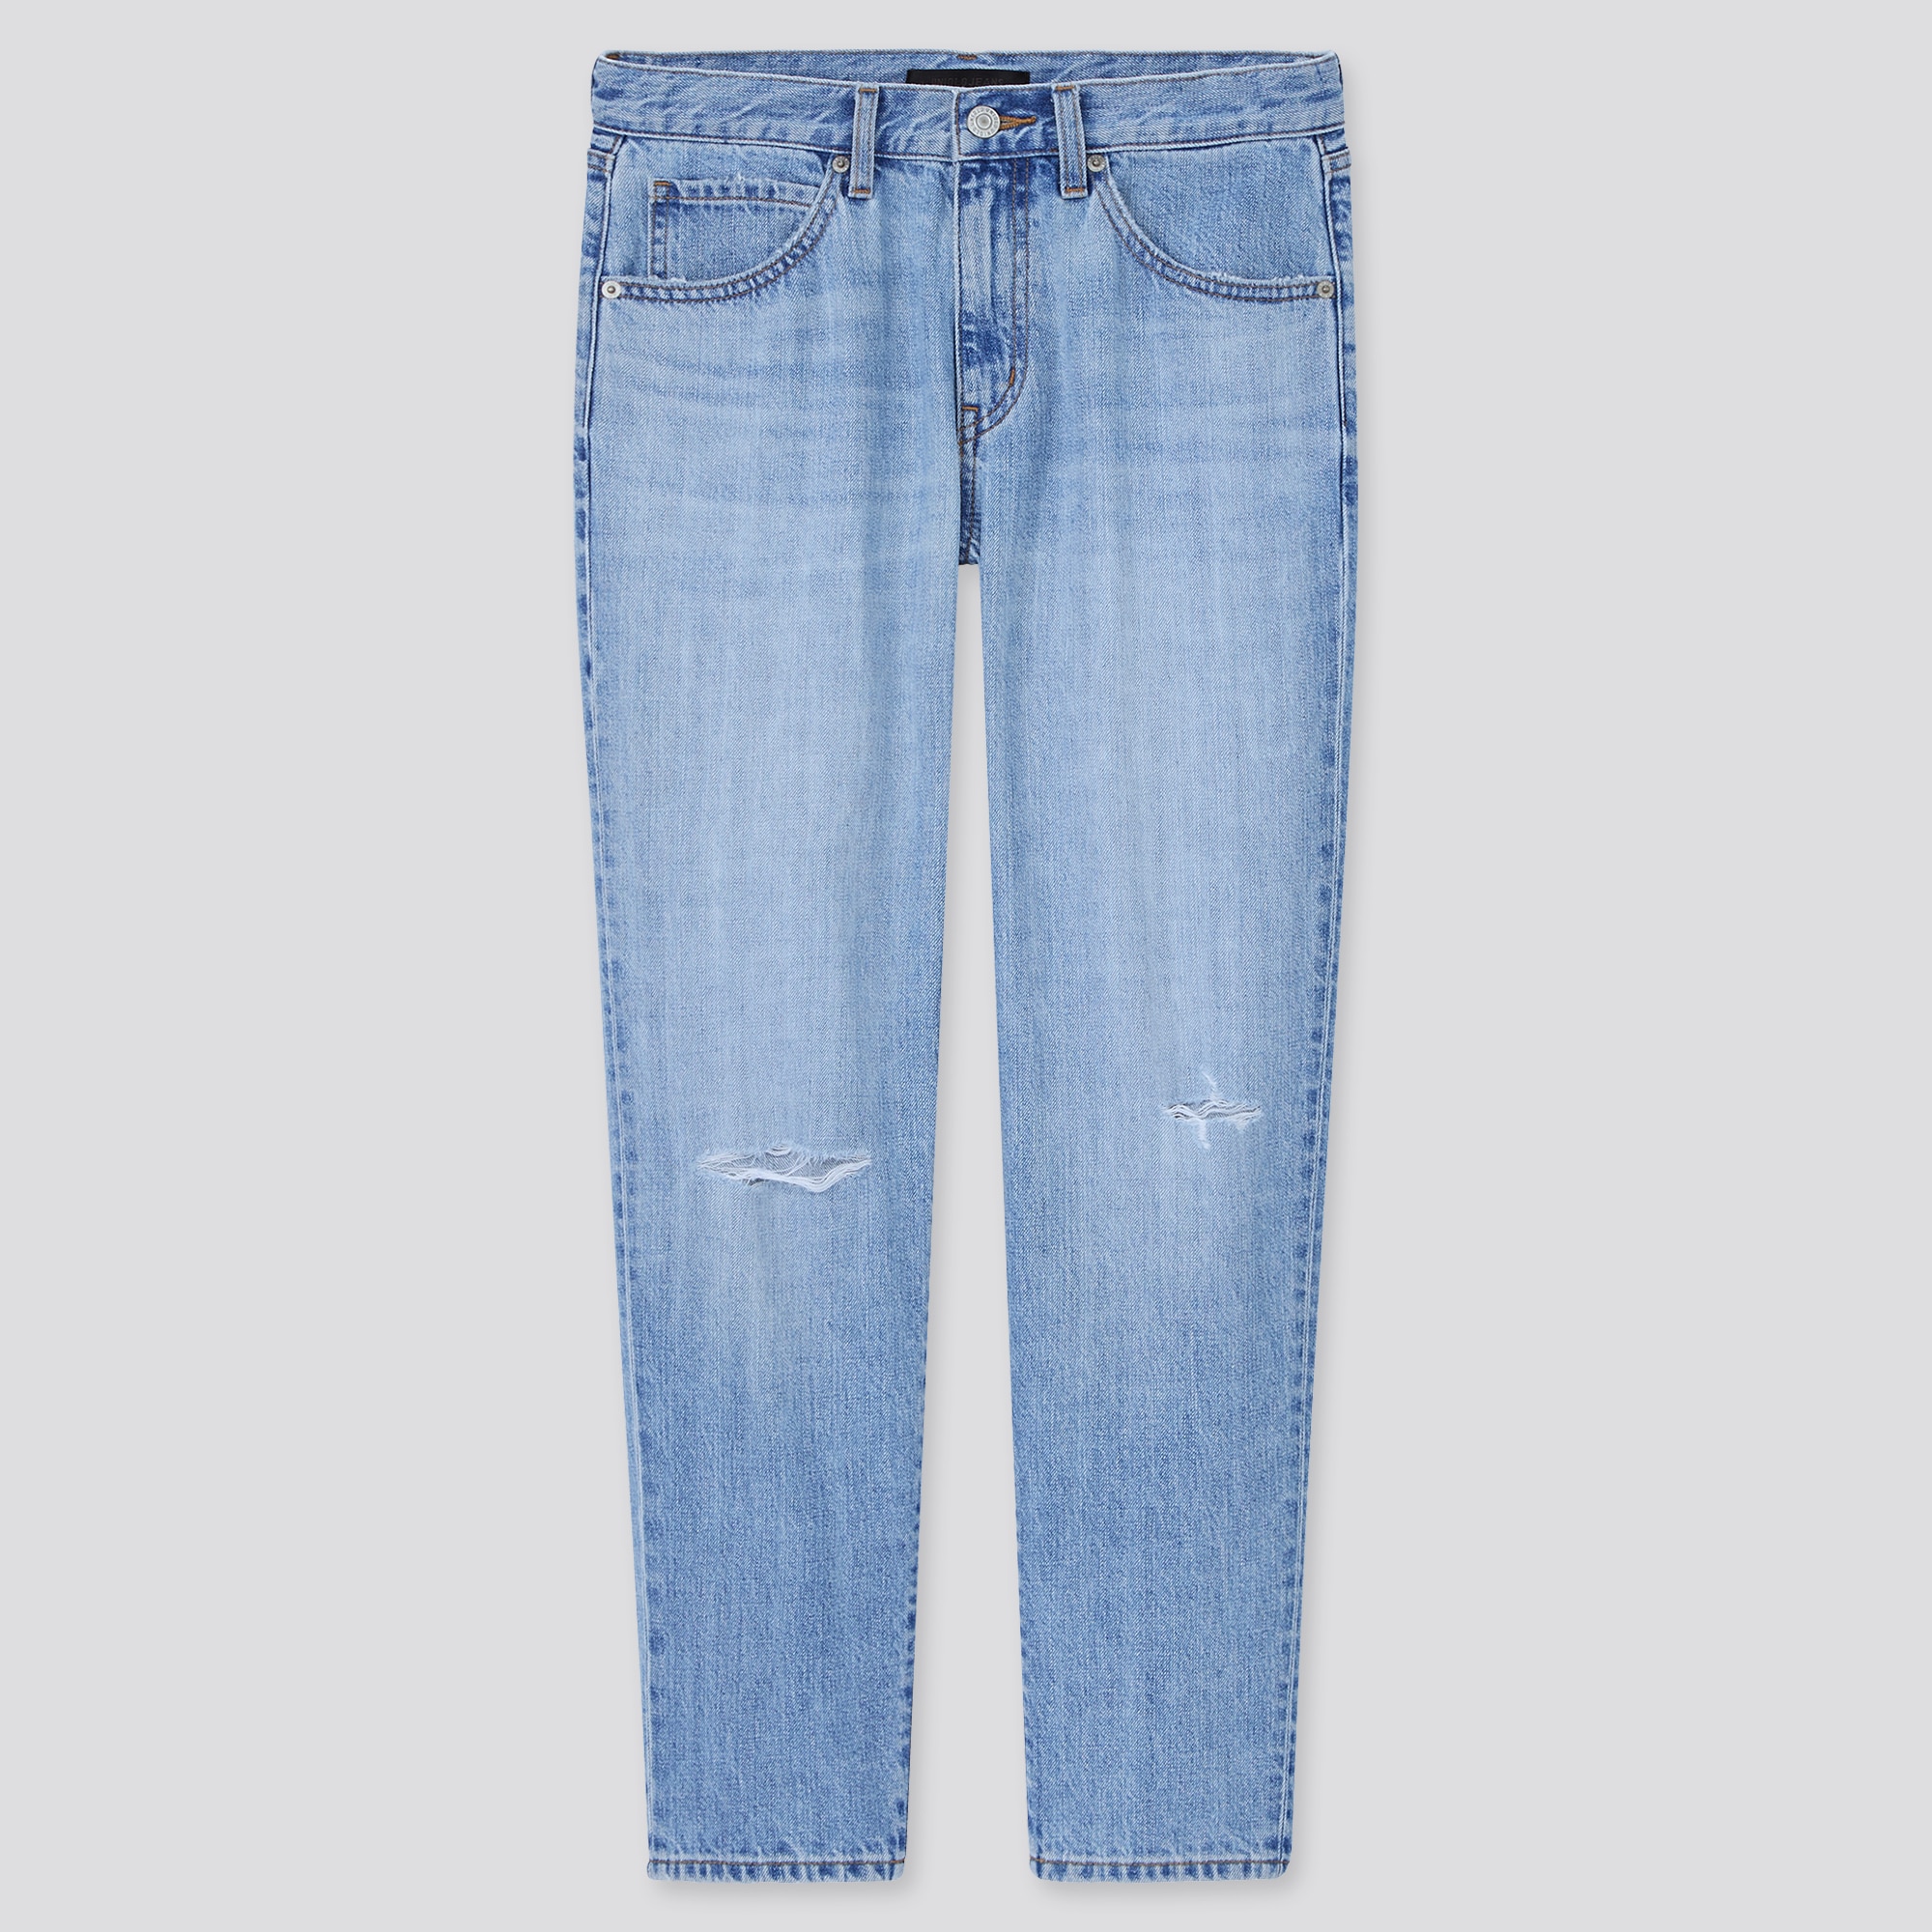 uniqlo tapered jeans